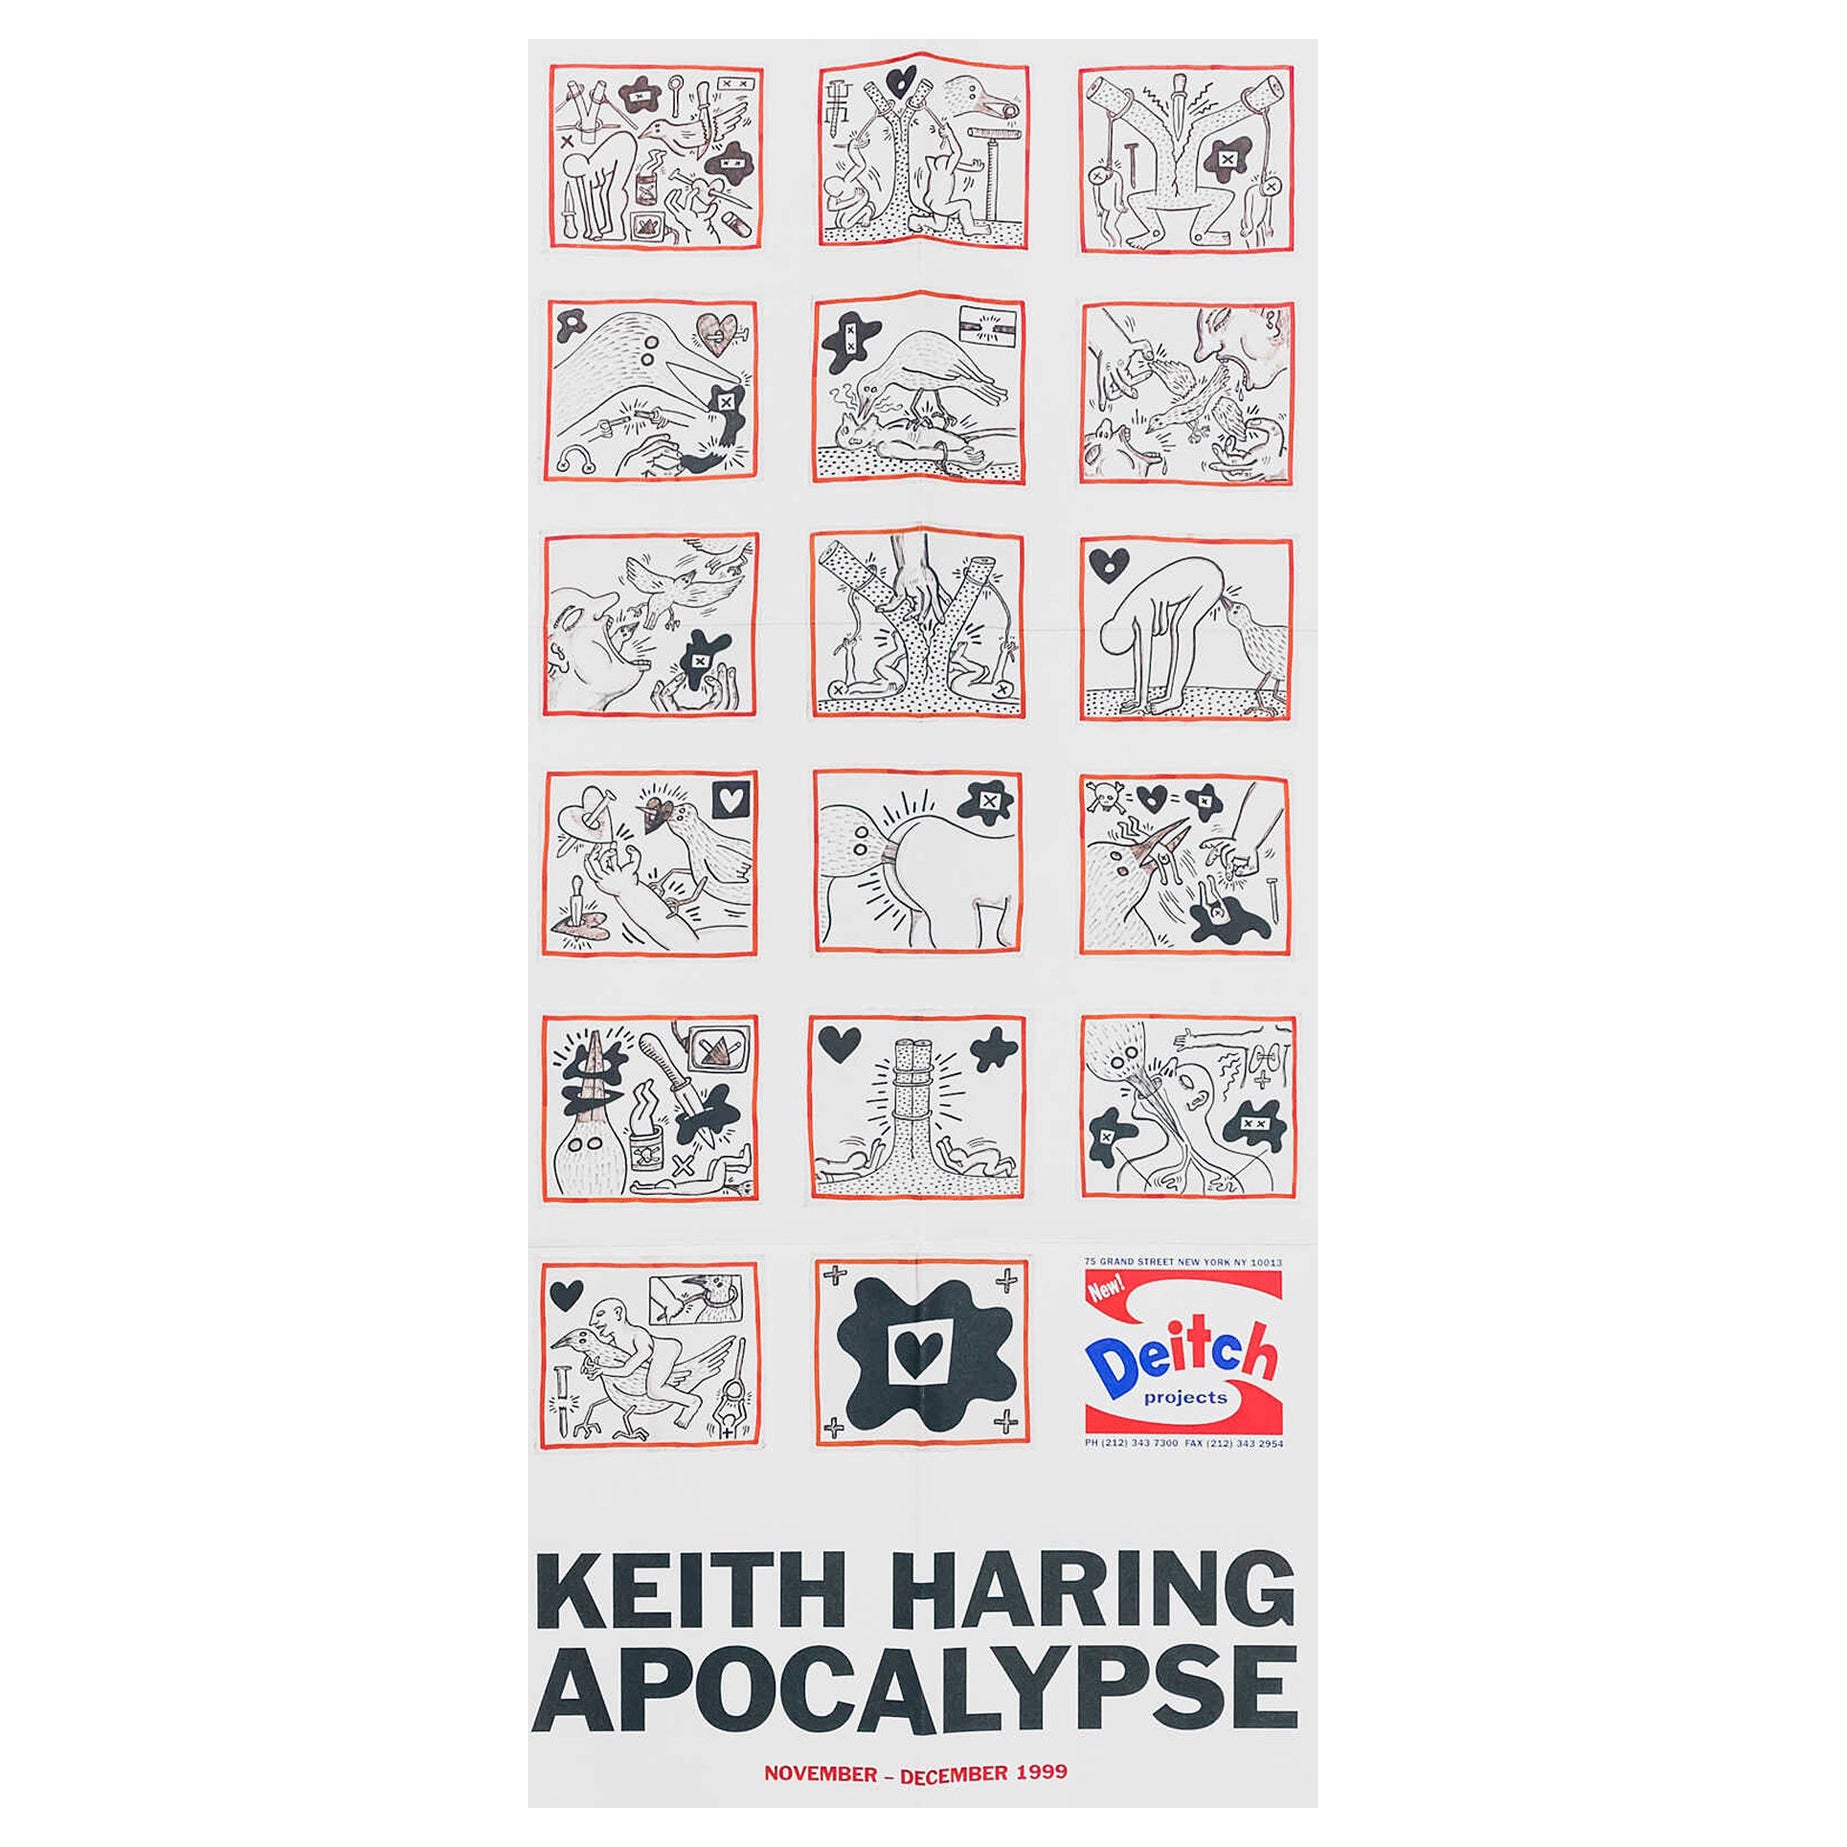 Keith Haring Apocalypse Exhibition Poster 1999 For Sale